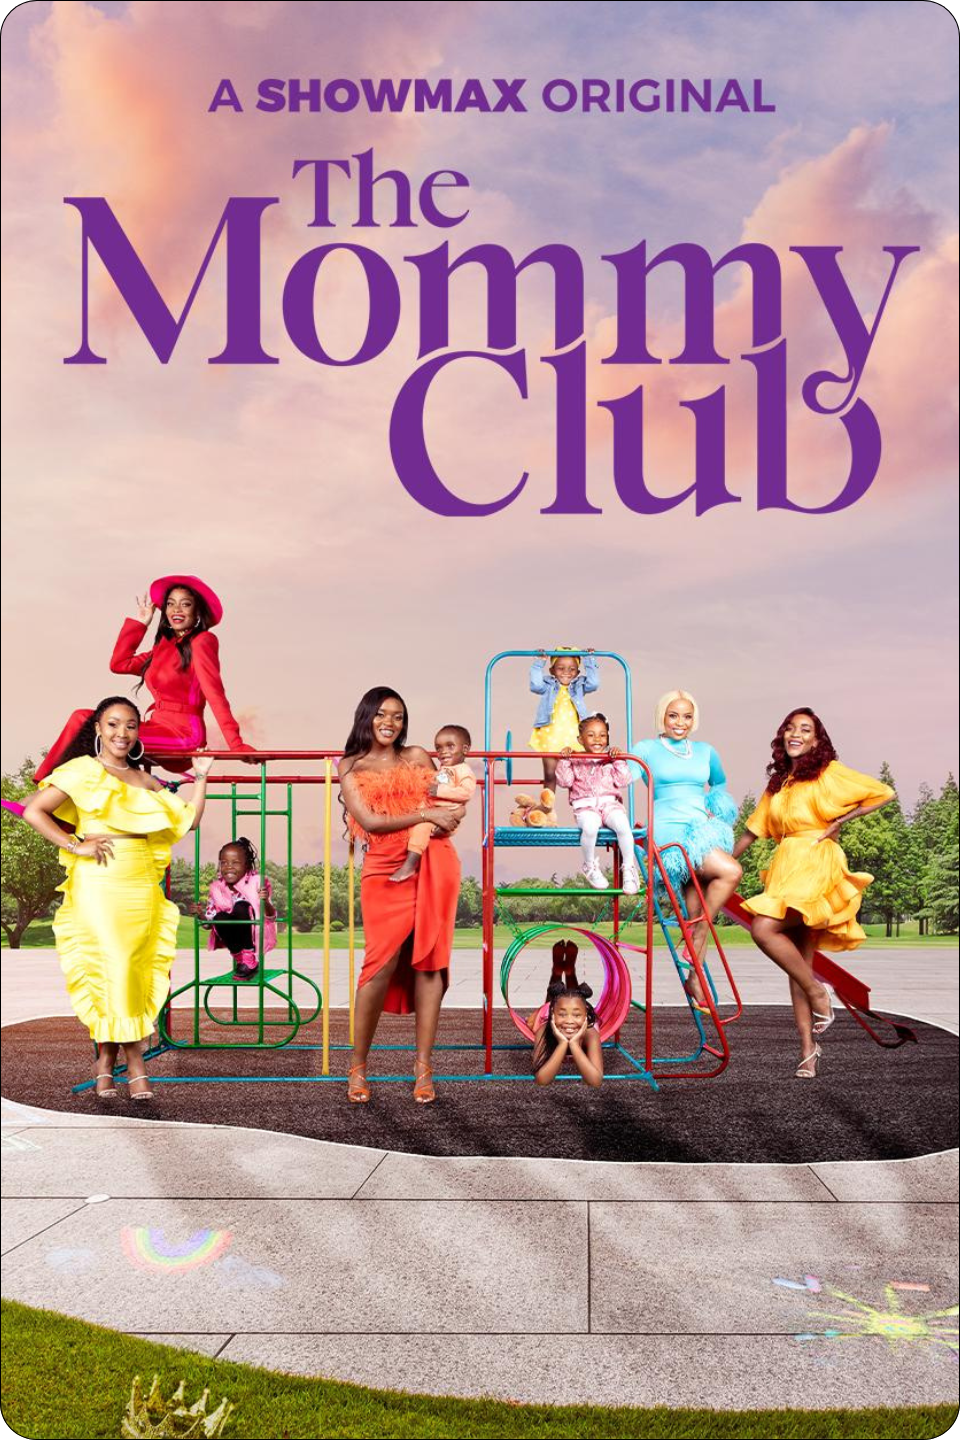 The Mommy Club S02 (Episode 13-14 Added) – SA